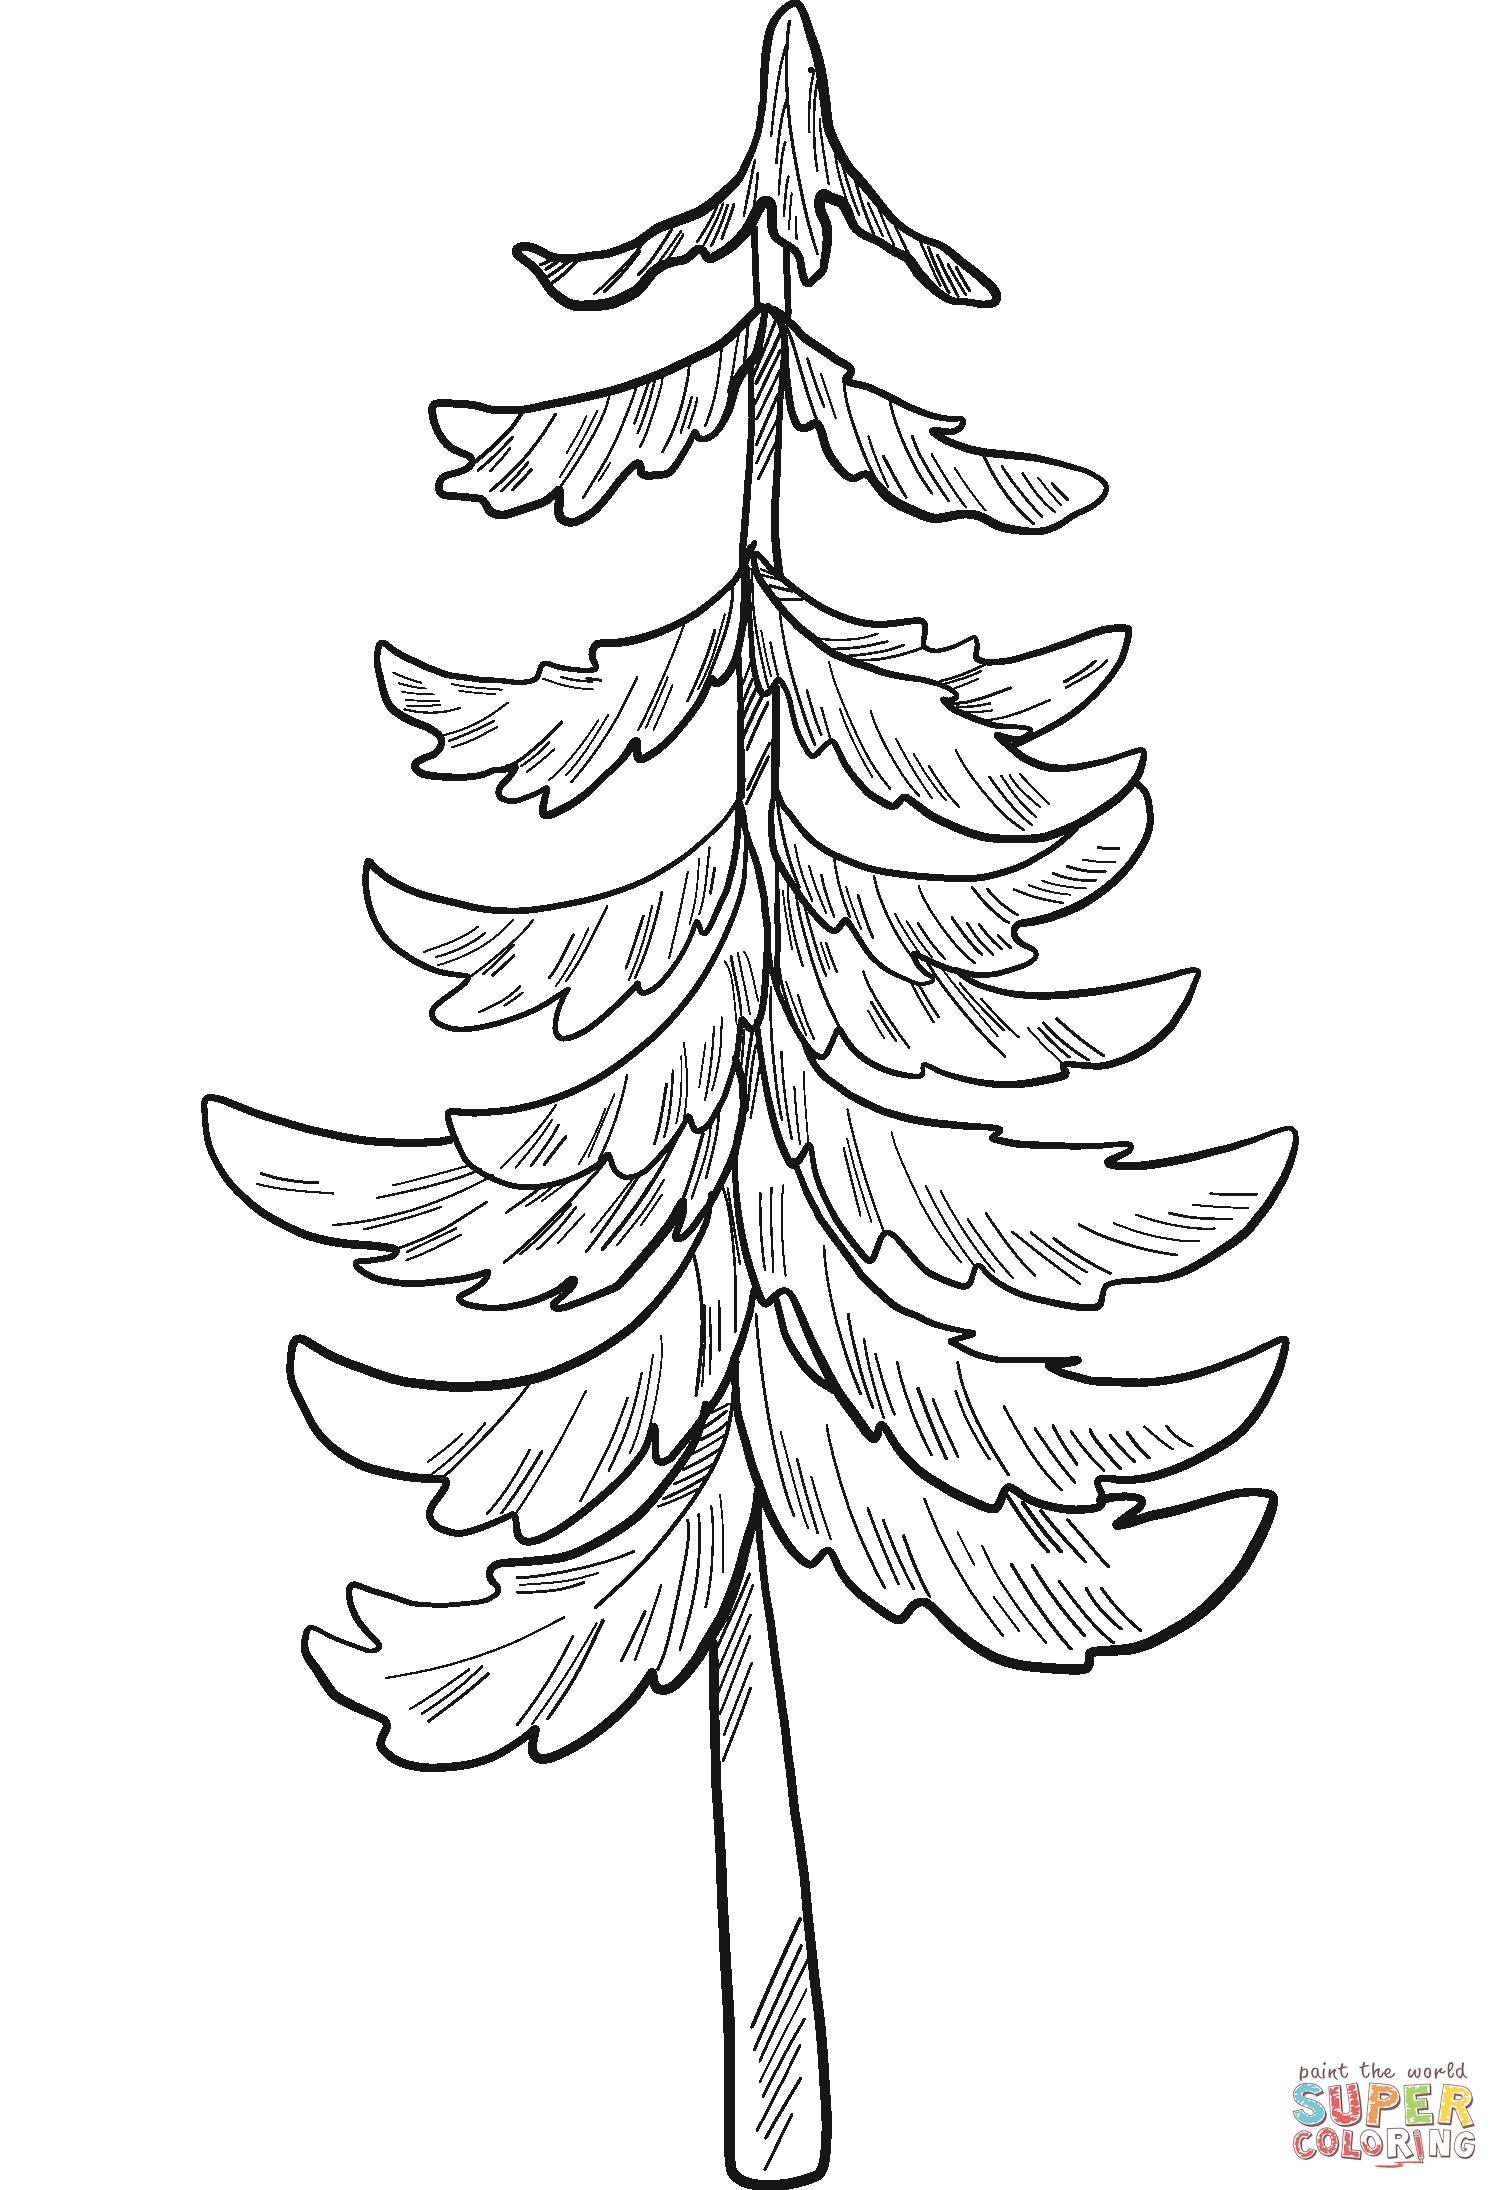 Evergreen tree coloring page free printable coloring pages